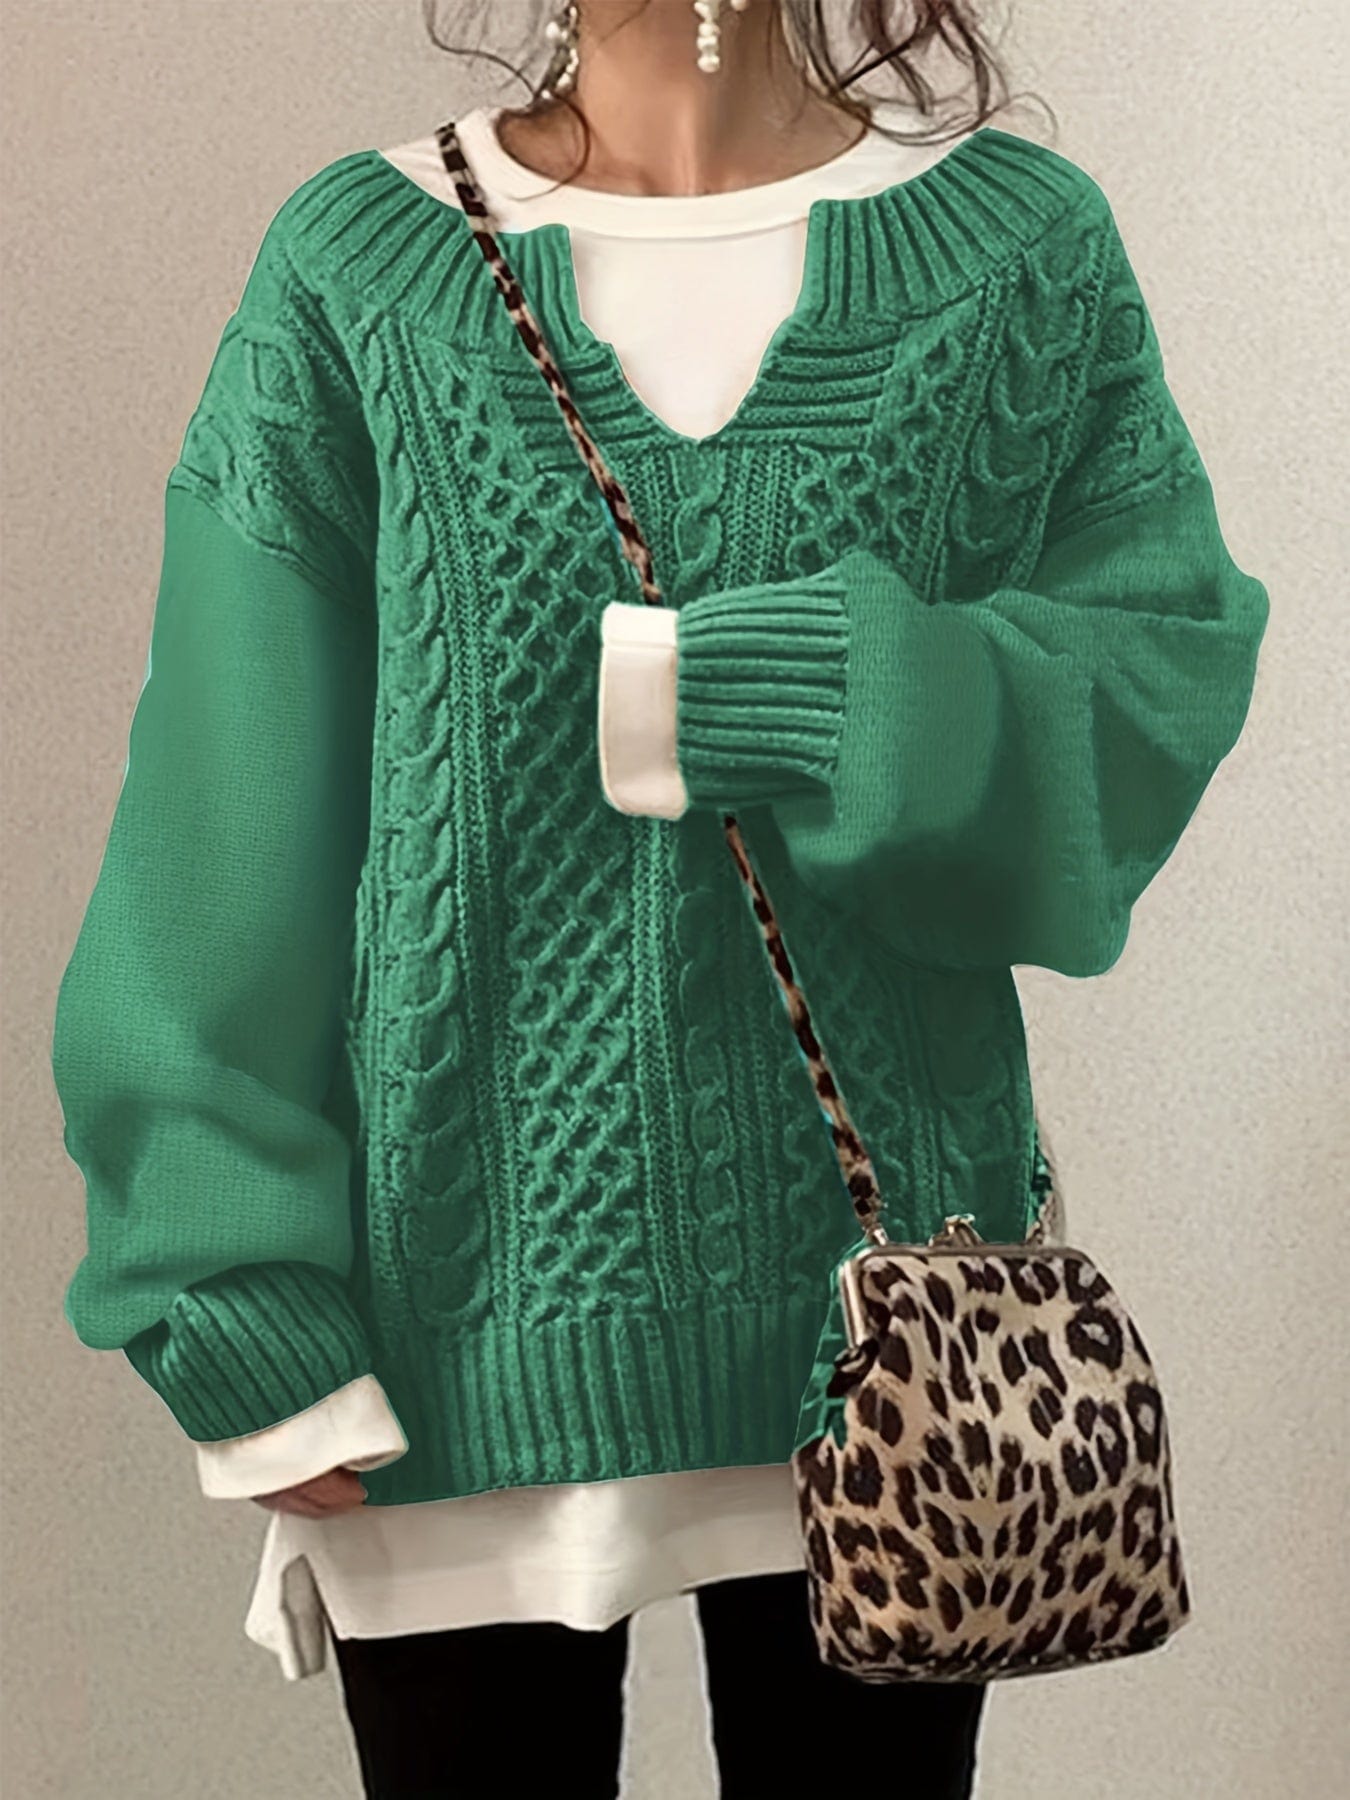 Plus Size Casual Sweater, Women's Plus Solid Jacquard Long Sleeve Notched Neck Slight Stretch Sweater PLU2309A2106GRD1XL(14) Green / 1XL(14)